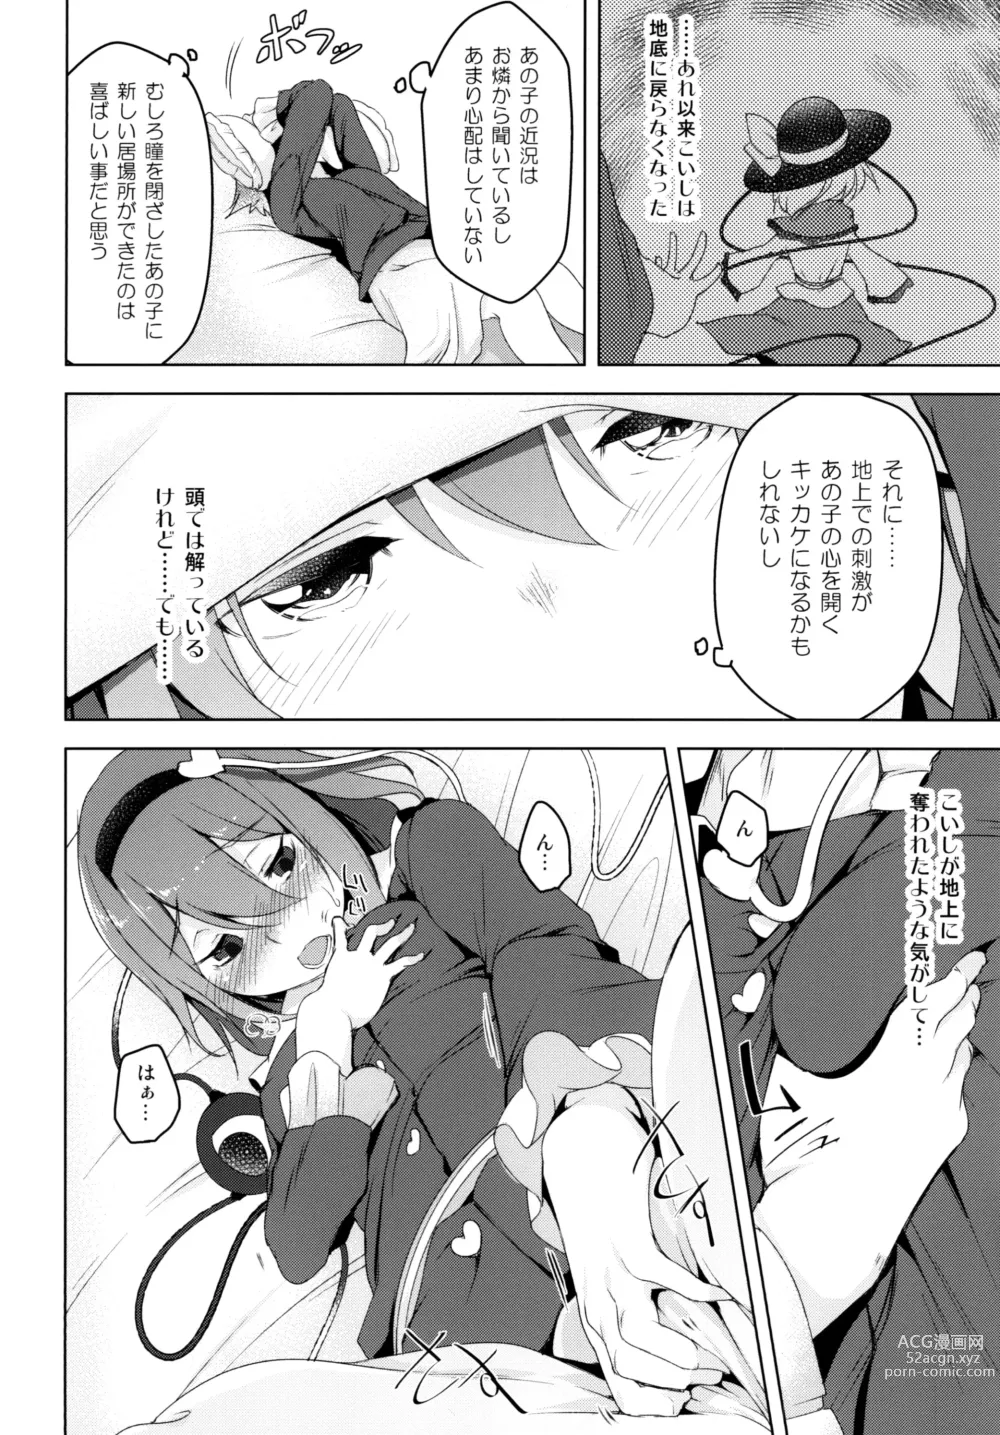 Page 6 of doujinshi Incest